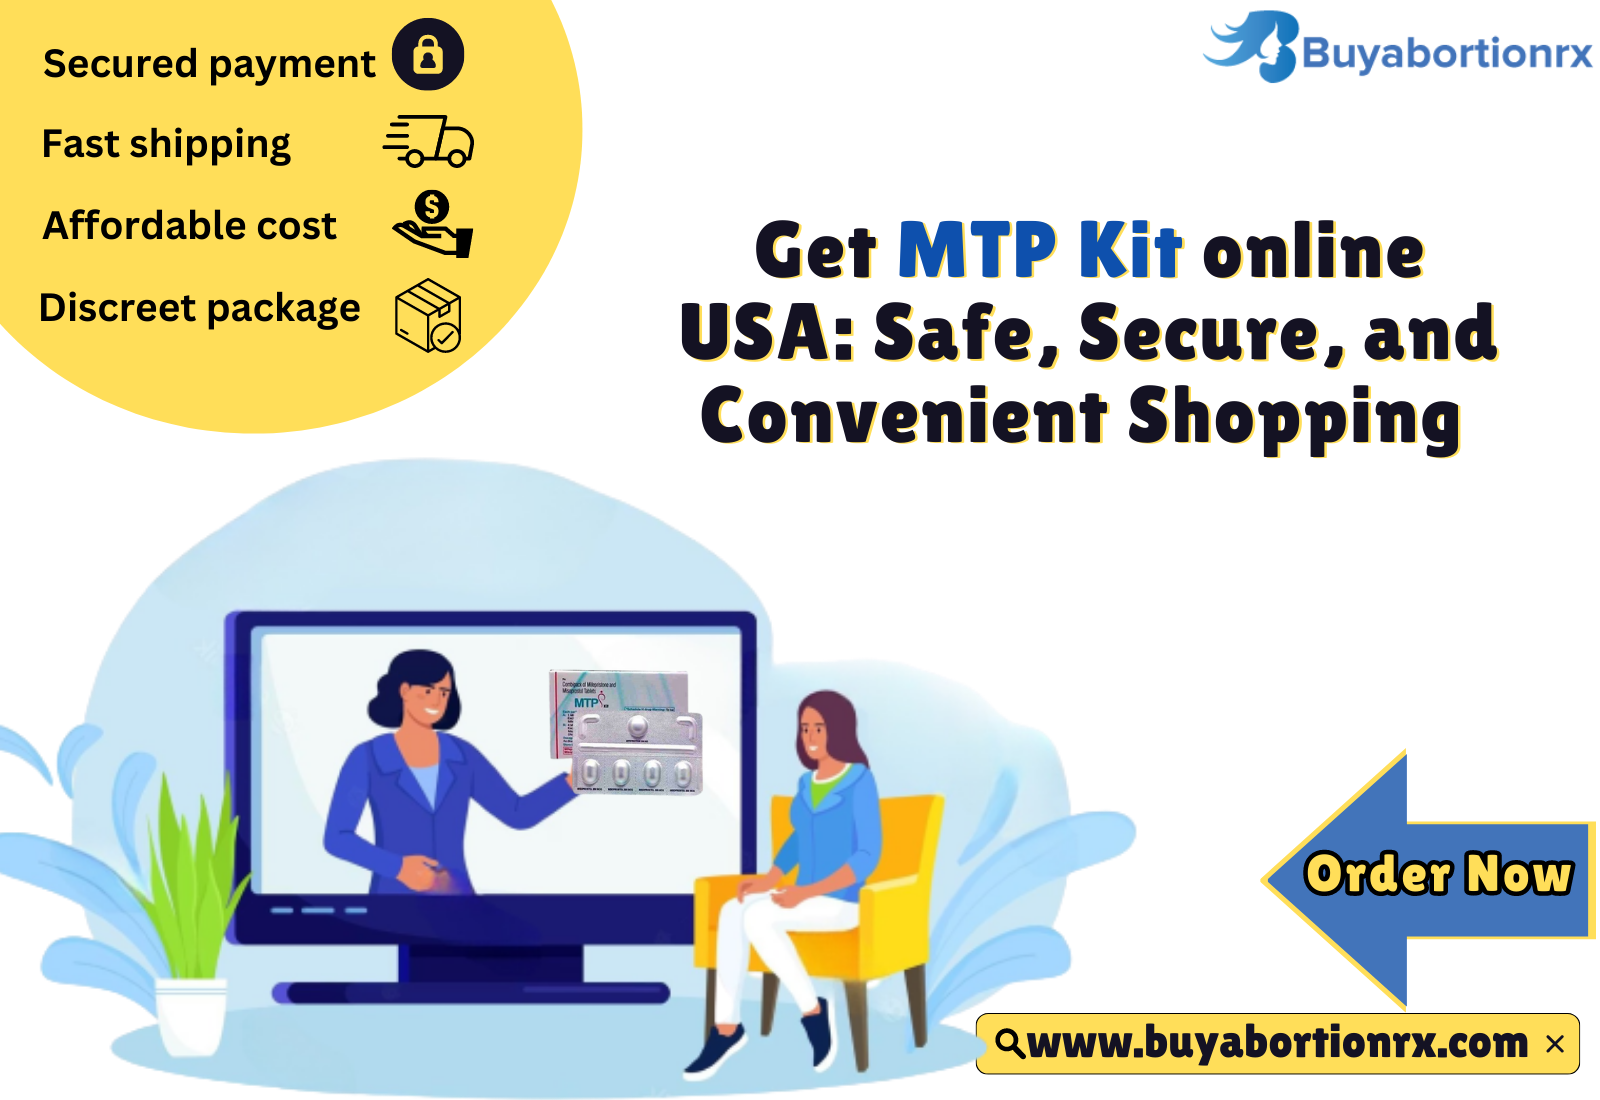 Get MTP Kit online USA: Safe, Secure, and Convenient Shopping  - photo